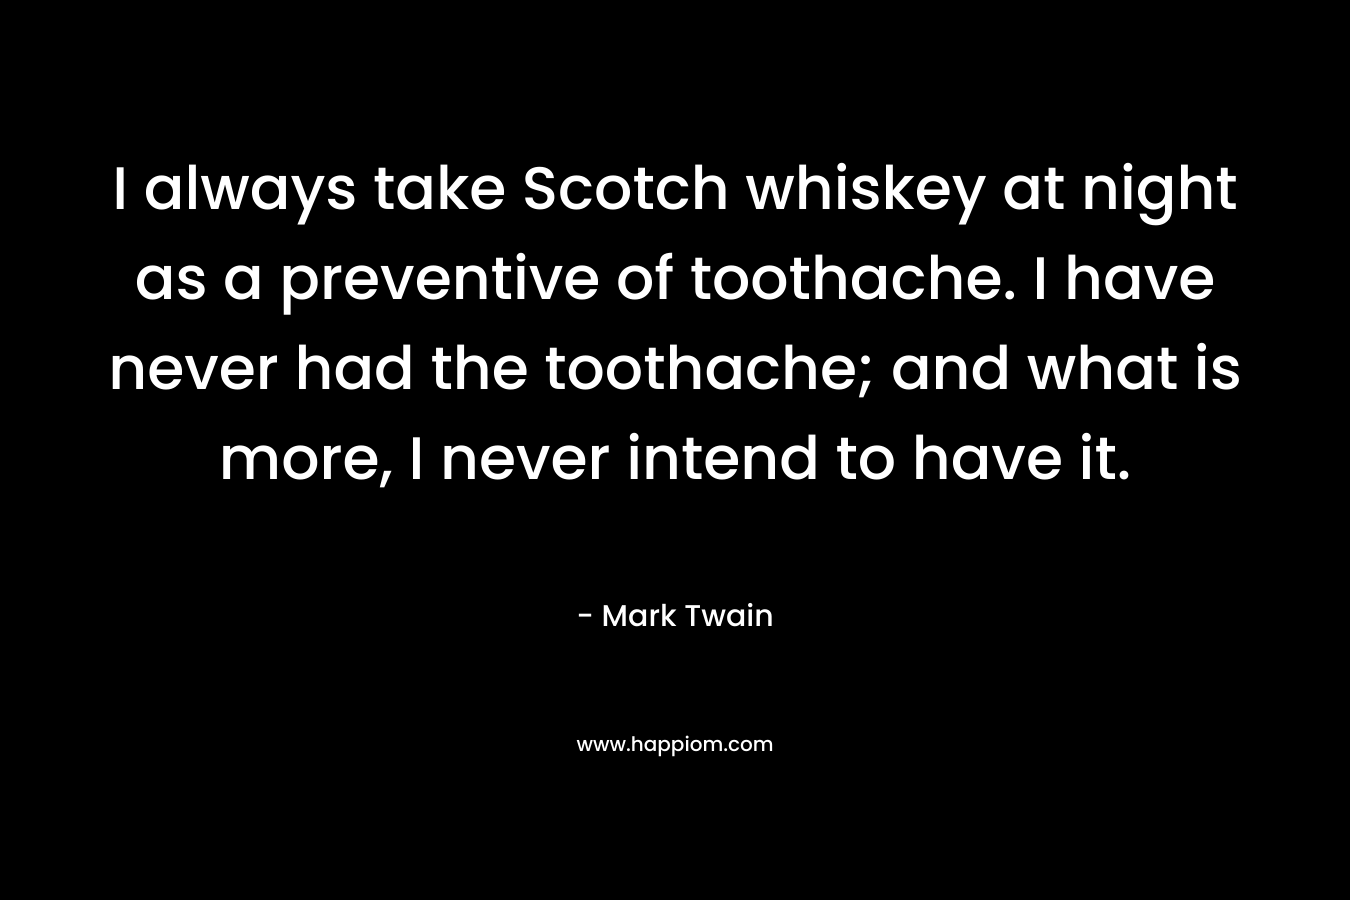 I always take Scotch whiskey at night as a preventive of toothache. I have never had the toothache; and what is more, I never intend to have it. – Mark Twain